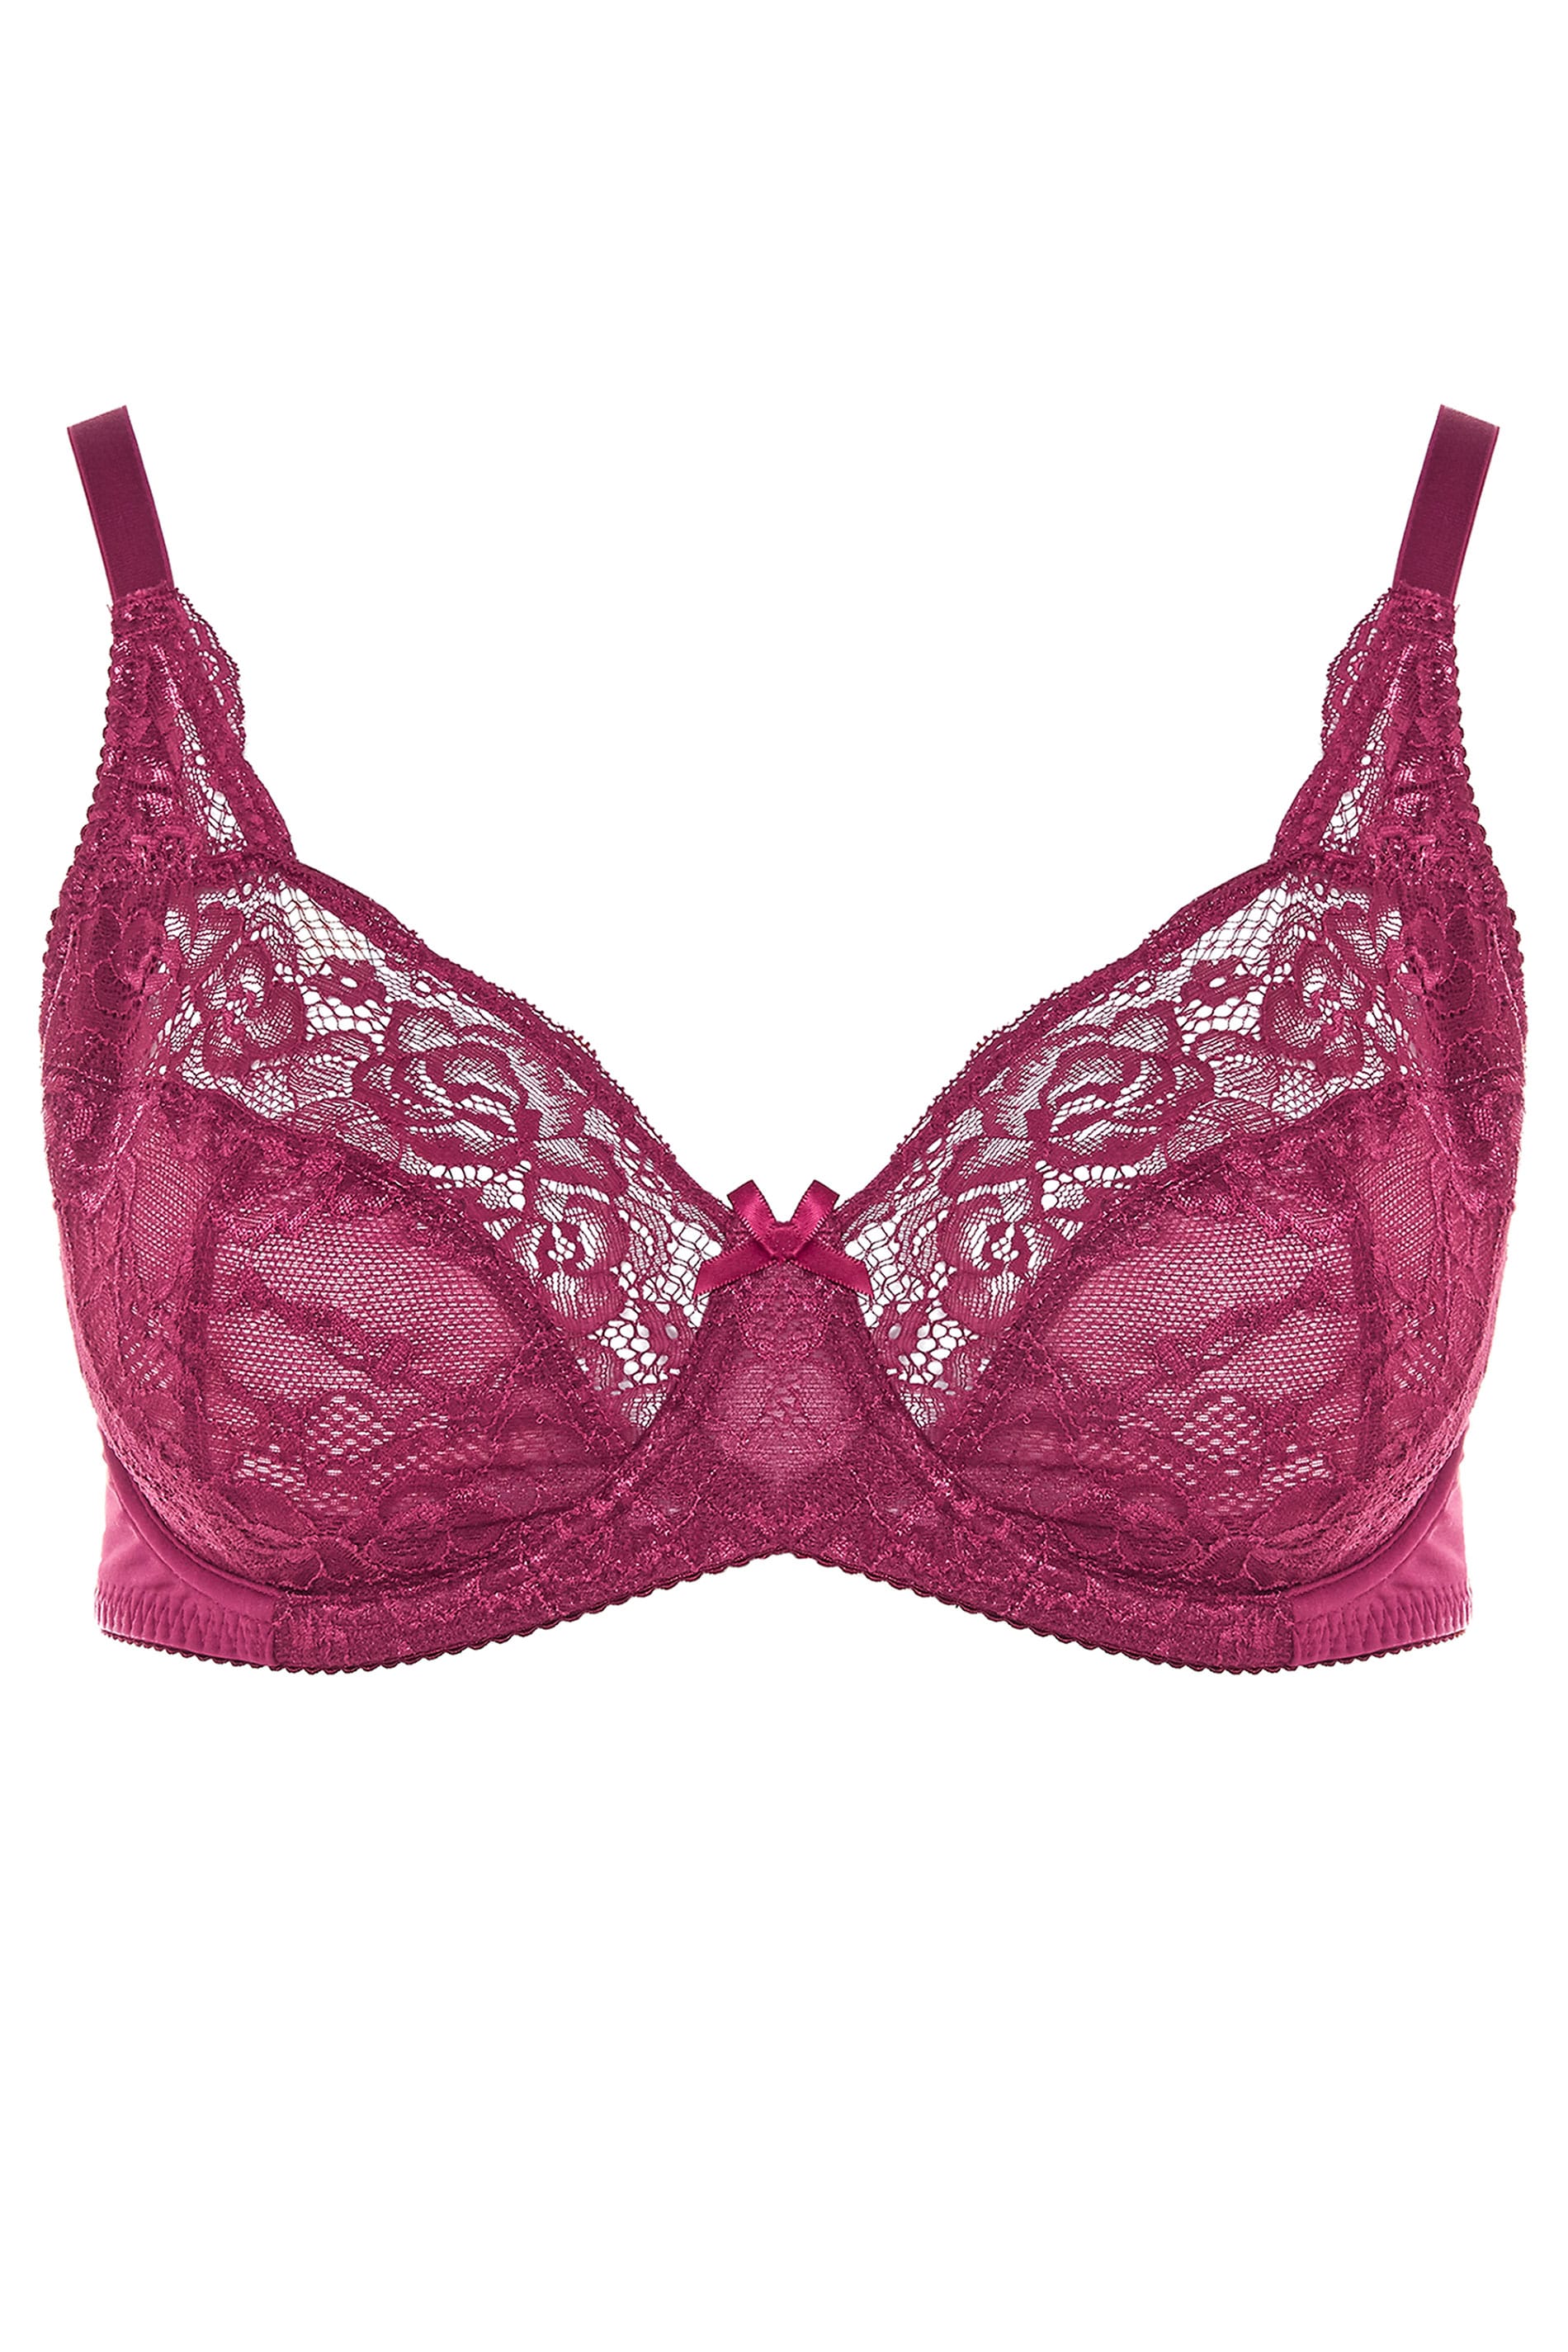 Berry Stretch Lace Non-Padded Underwired Bra | Sizes 38-40 | Yours Clothing 3